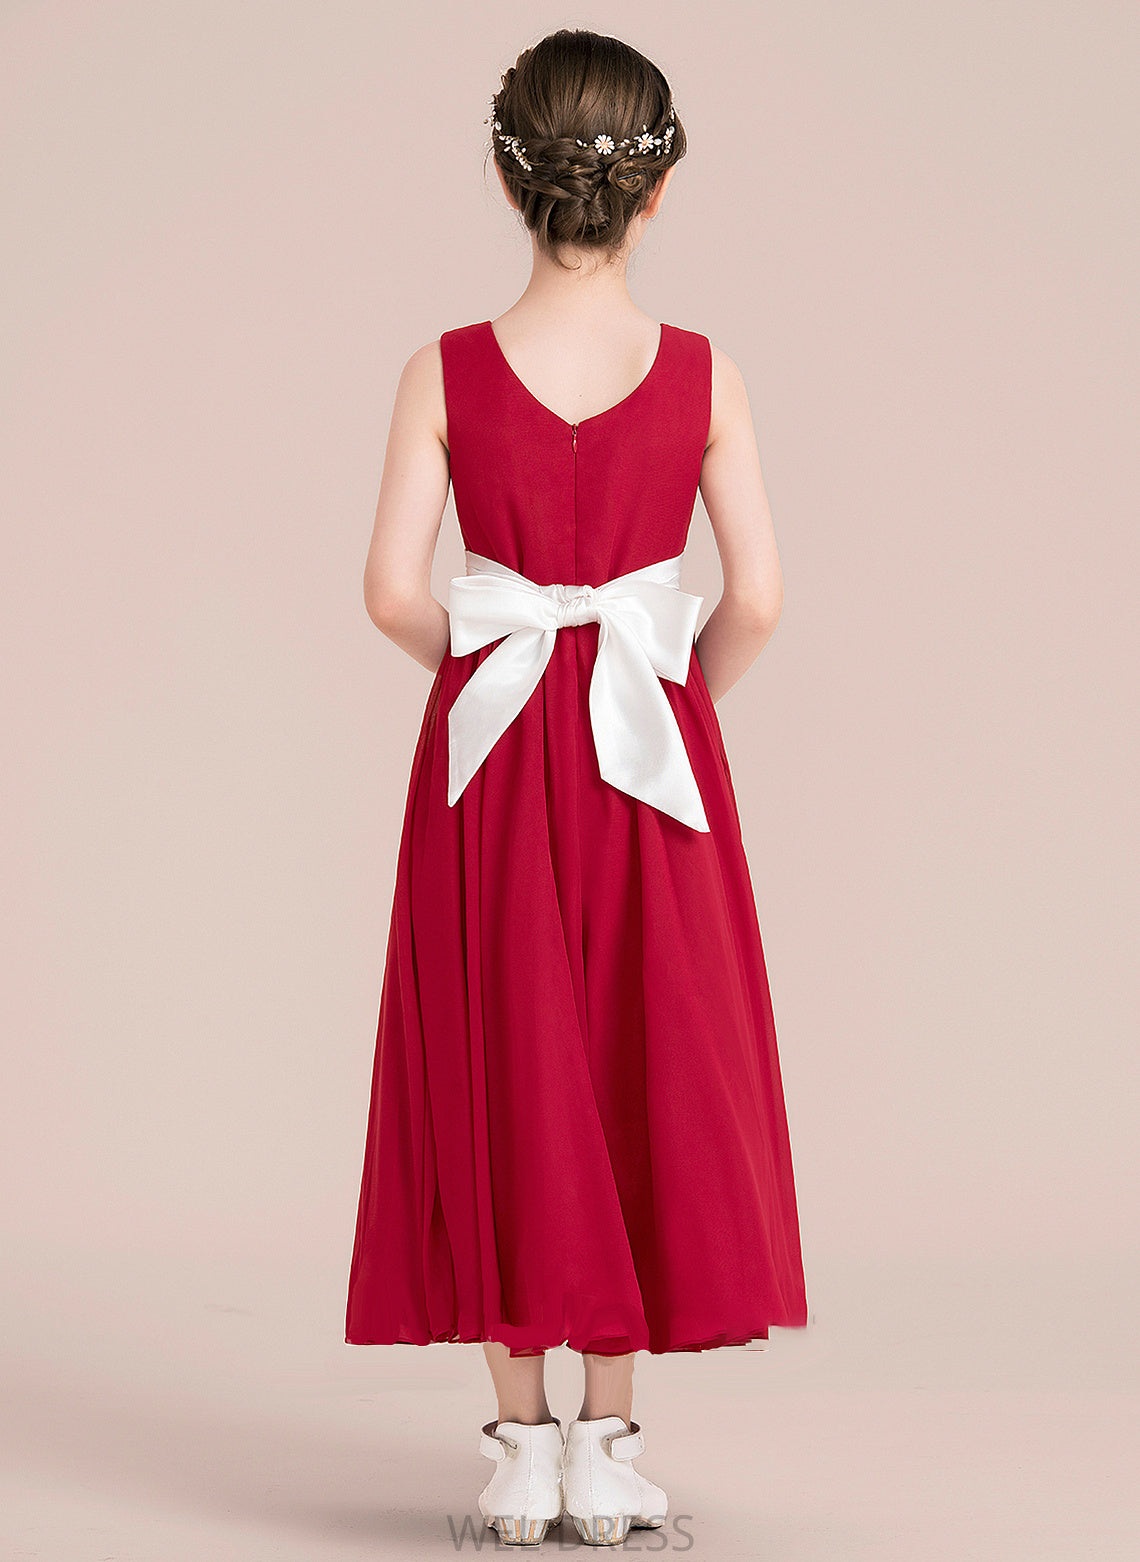 Bow(s) Chiffon Scoop With Erika Sash Ankle-Length Empire Neck A-Line Junior Bridesmaid Dresses